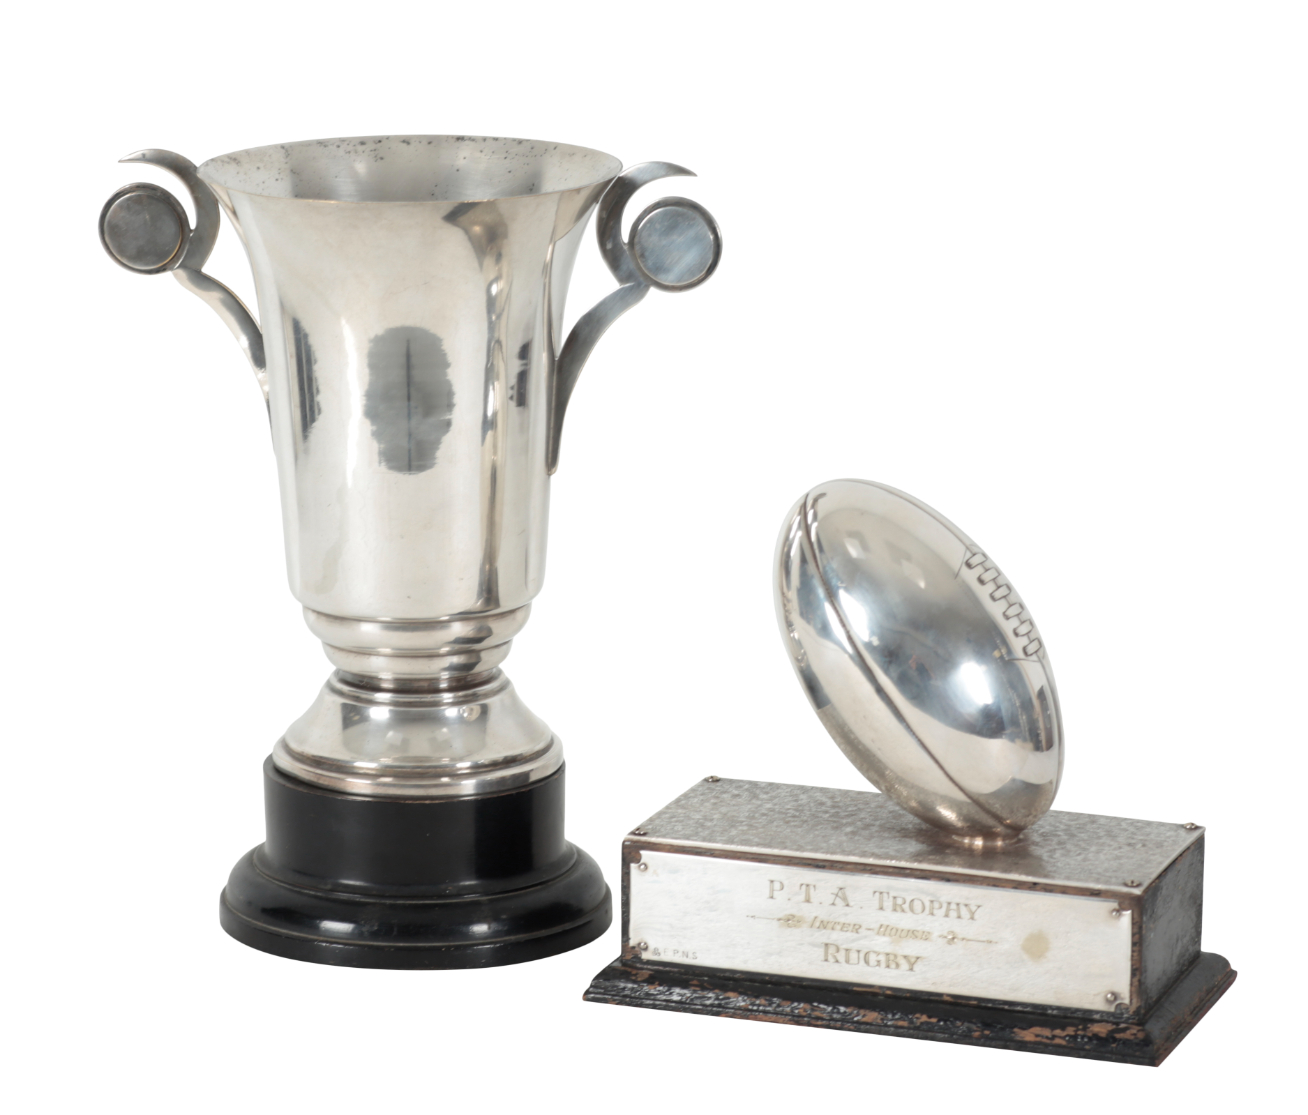 A SILVER PLATED RUGBY TROPHY P T A  310927